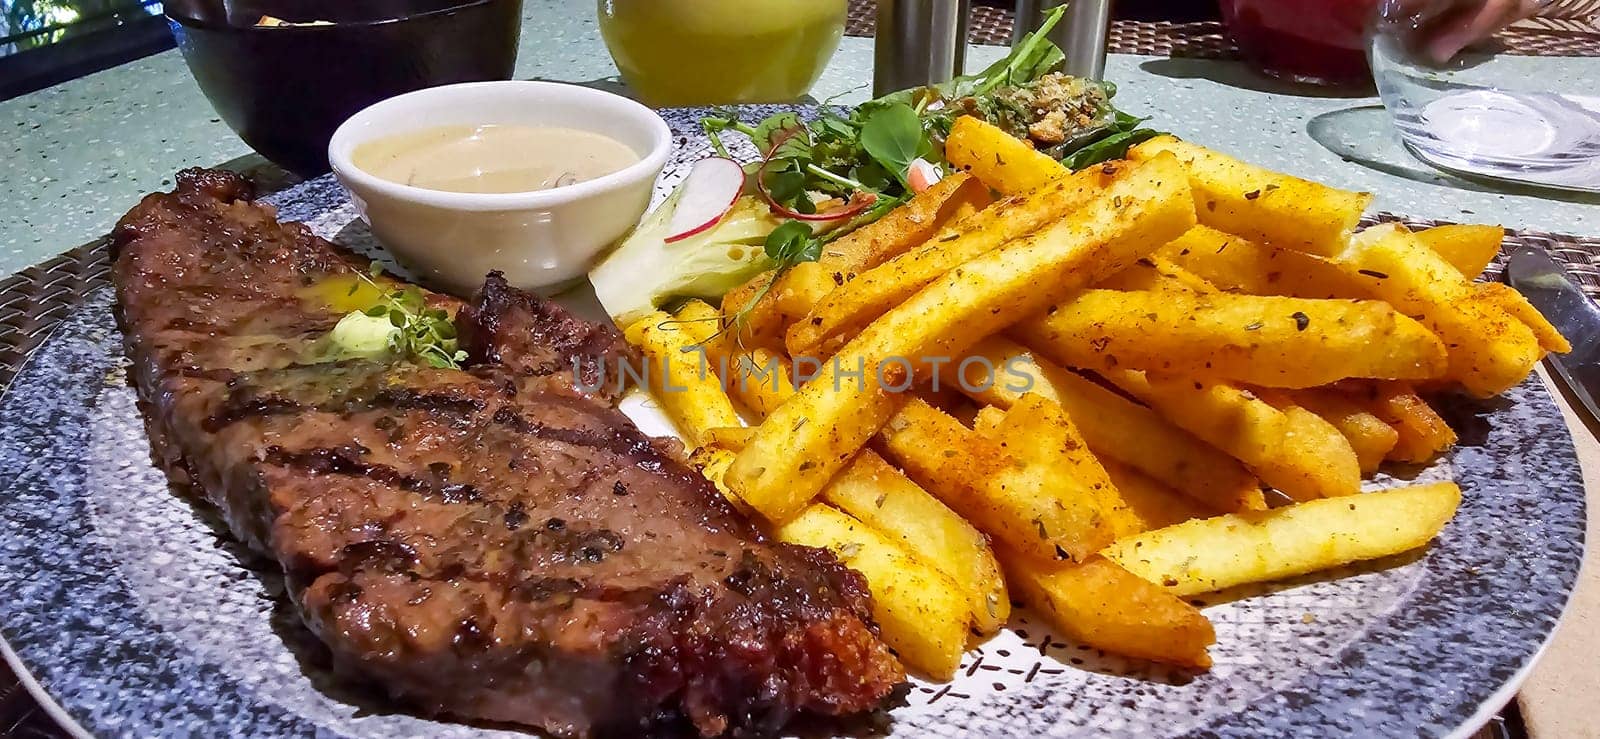 Beef New York strip loin steak or sirloin steak served with potatoes, and mushroom sauce and salad on plate by antoksena